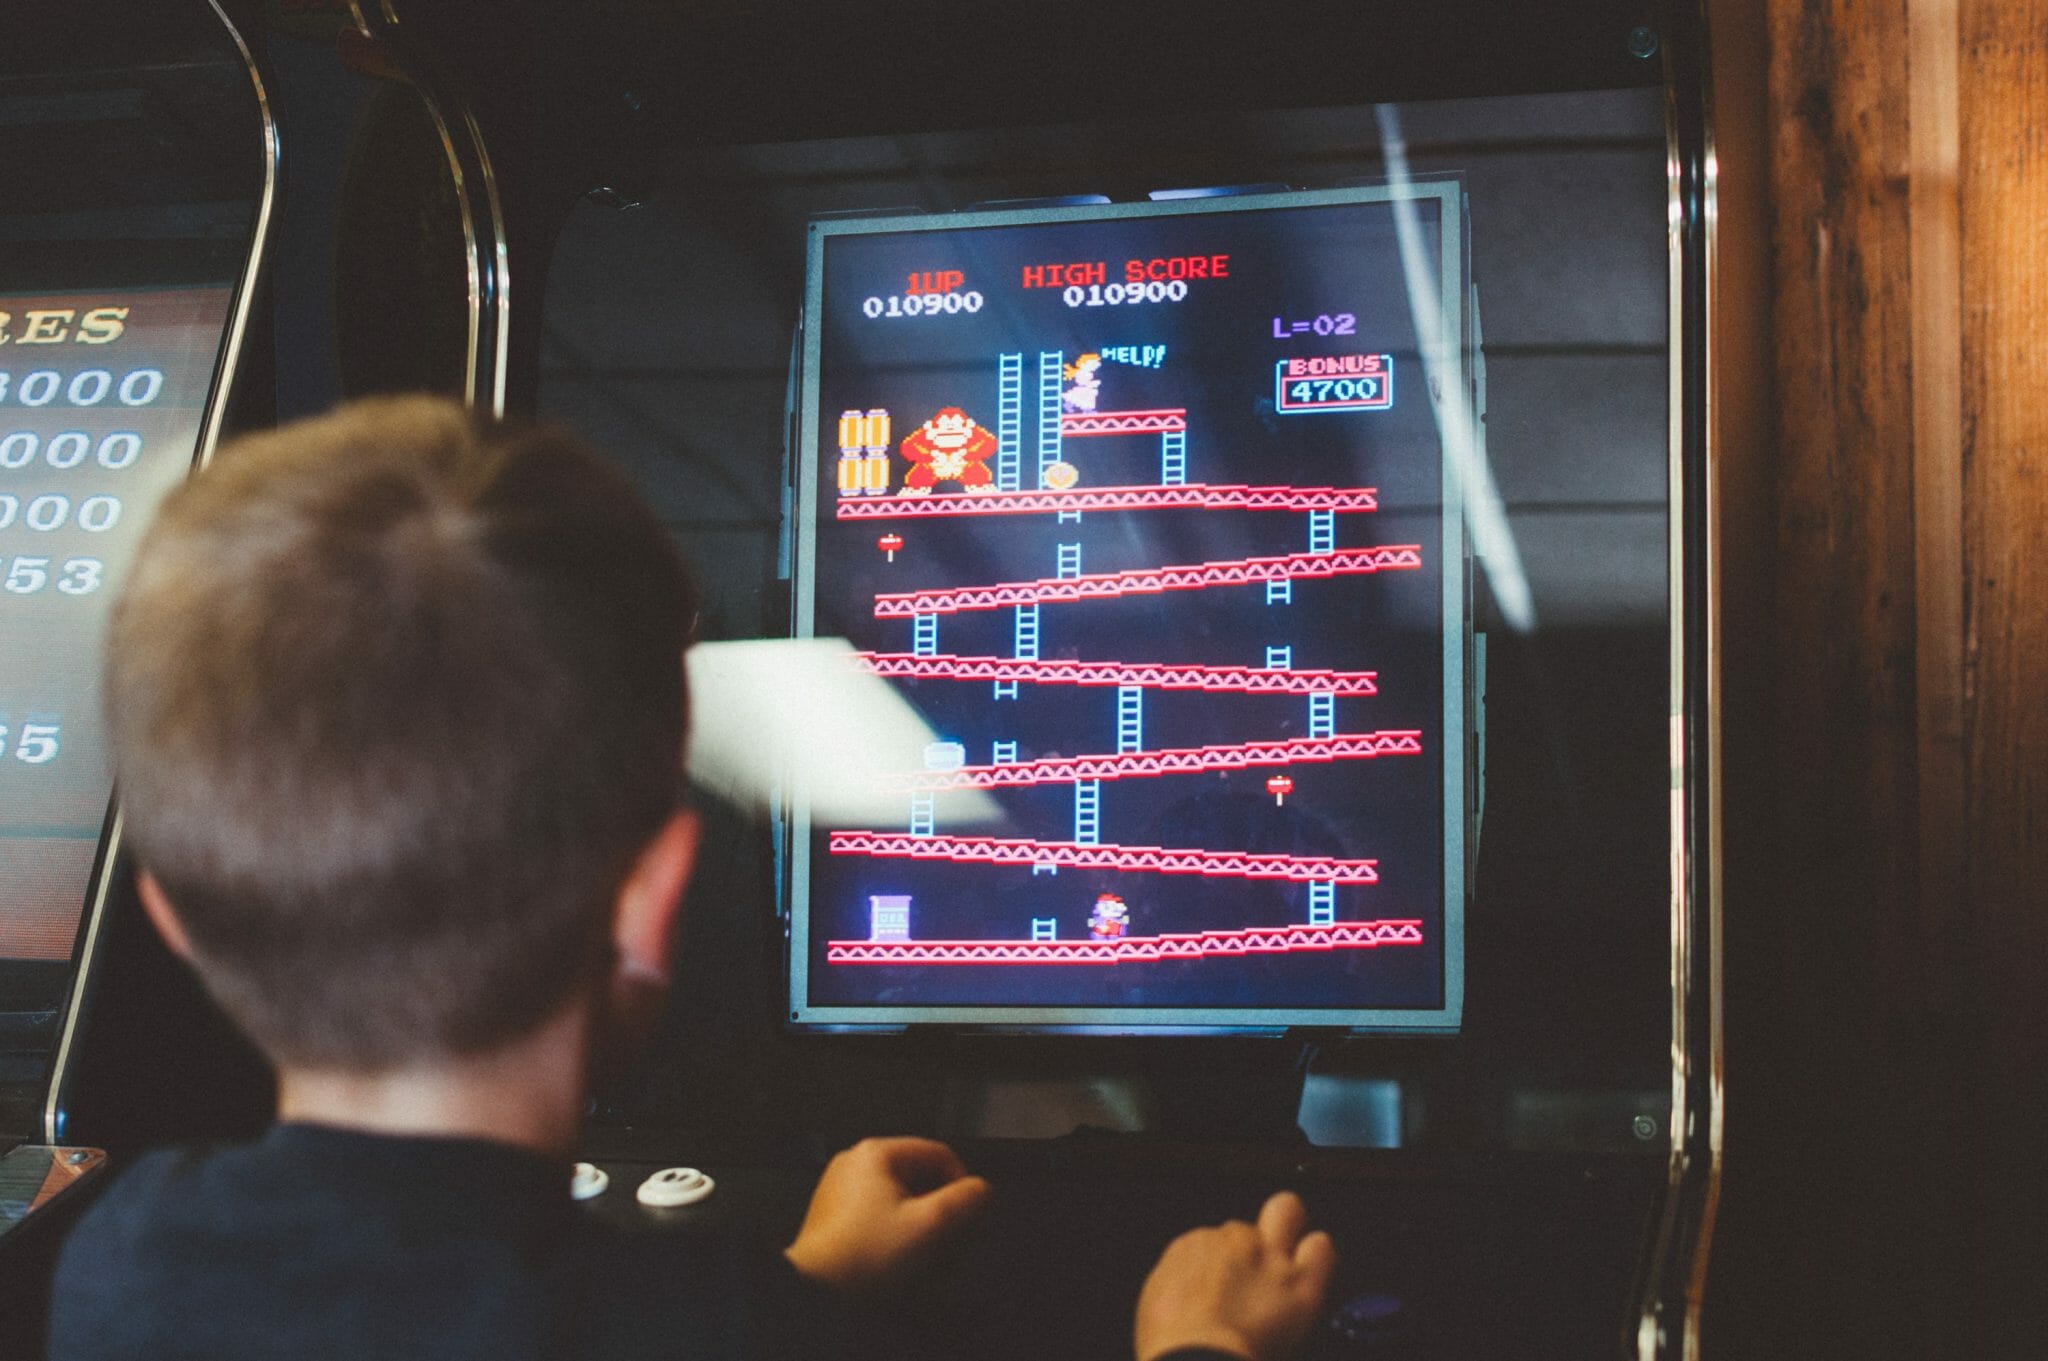 A Retro game being played